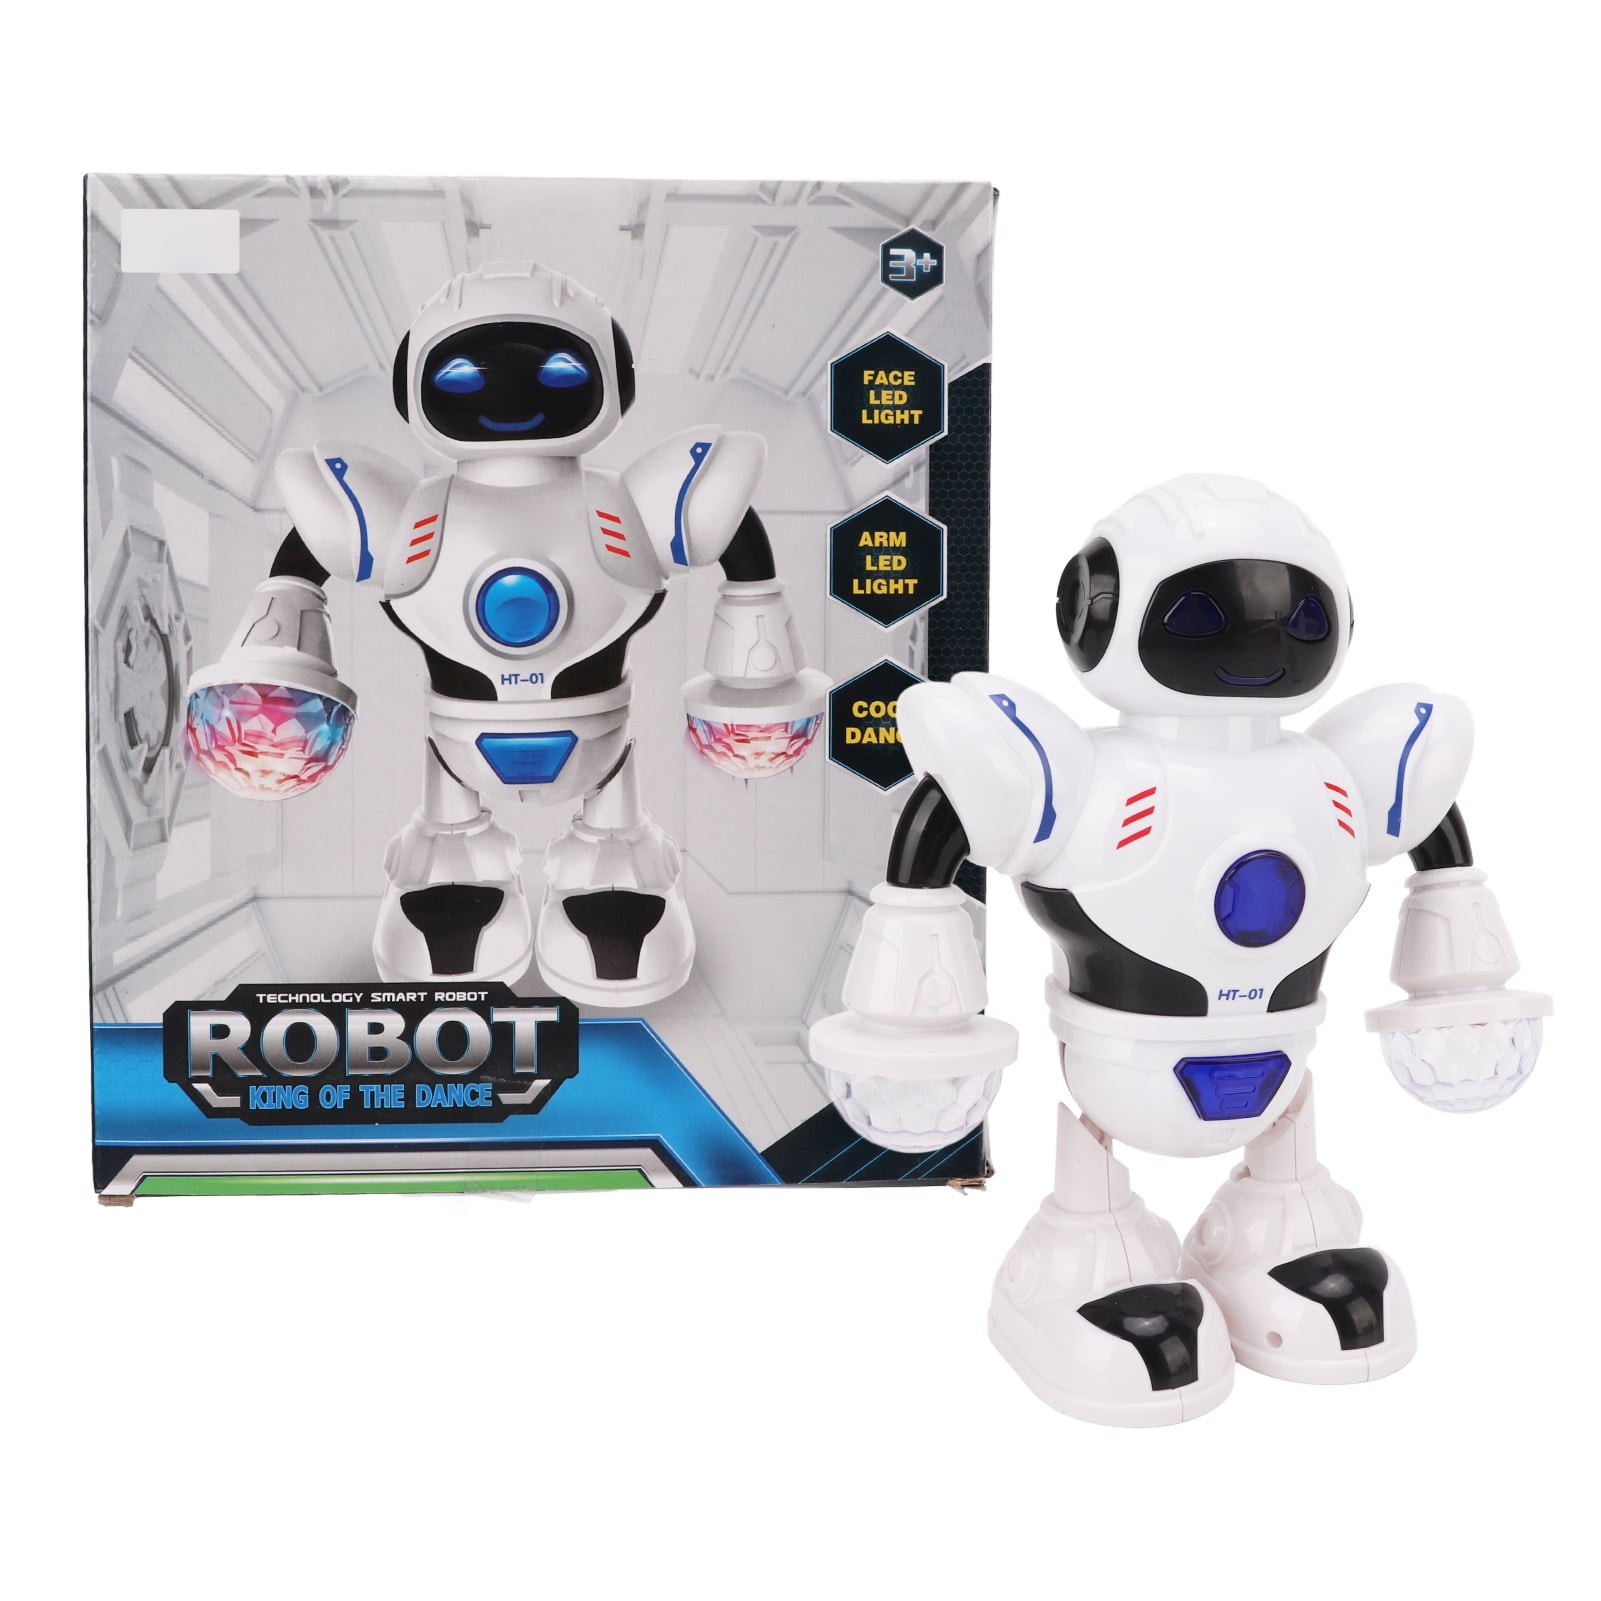 Dancing Robot Toy, Talking Robot Toy Educational Walking LED Lights ABS For Family Party Walmart.com